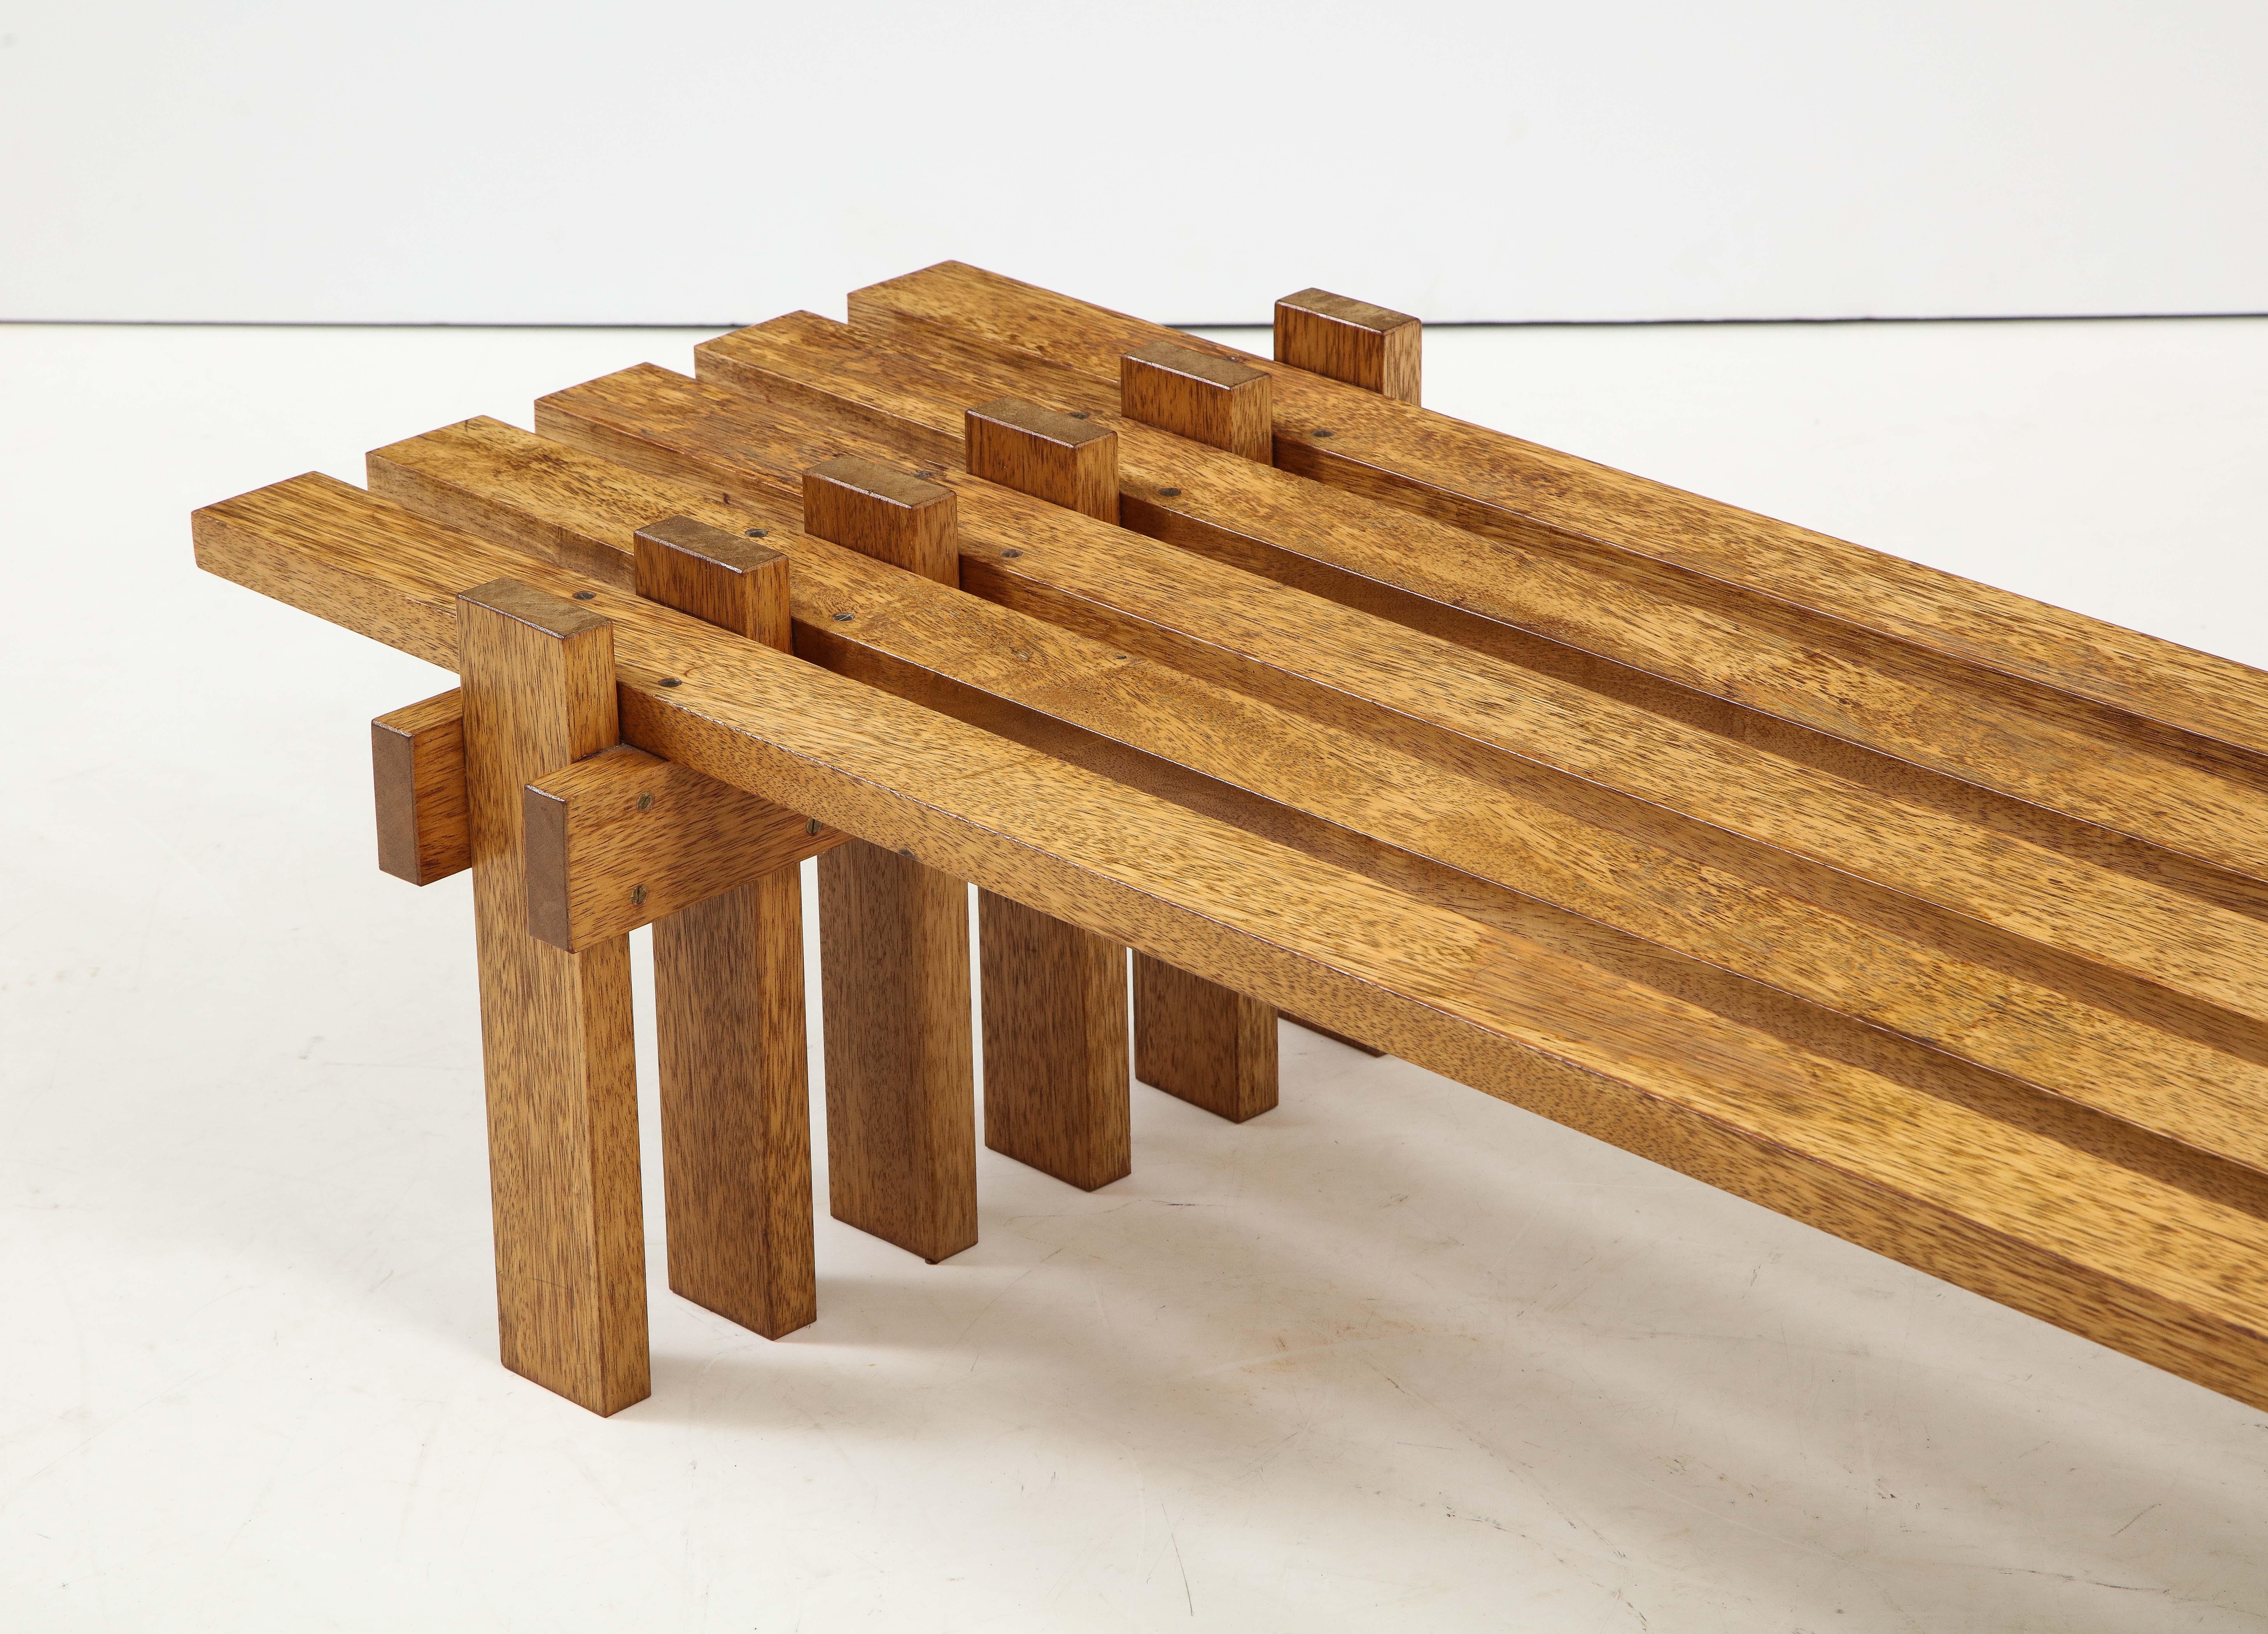 Unique Design by Amsterdam Architect, Coffee Table\Bench, Netherlands, c. 1960 1